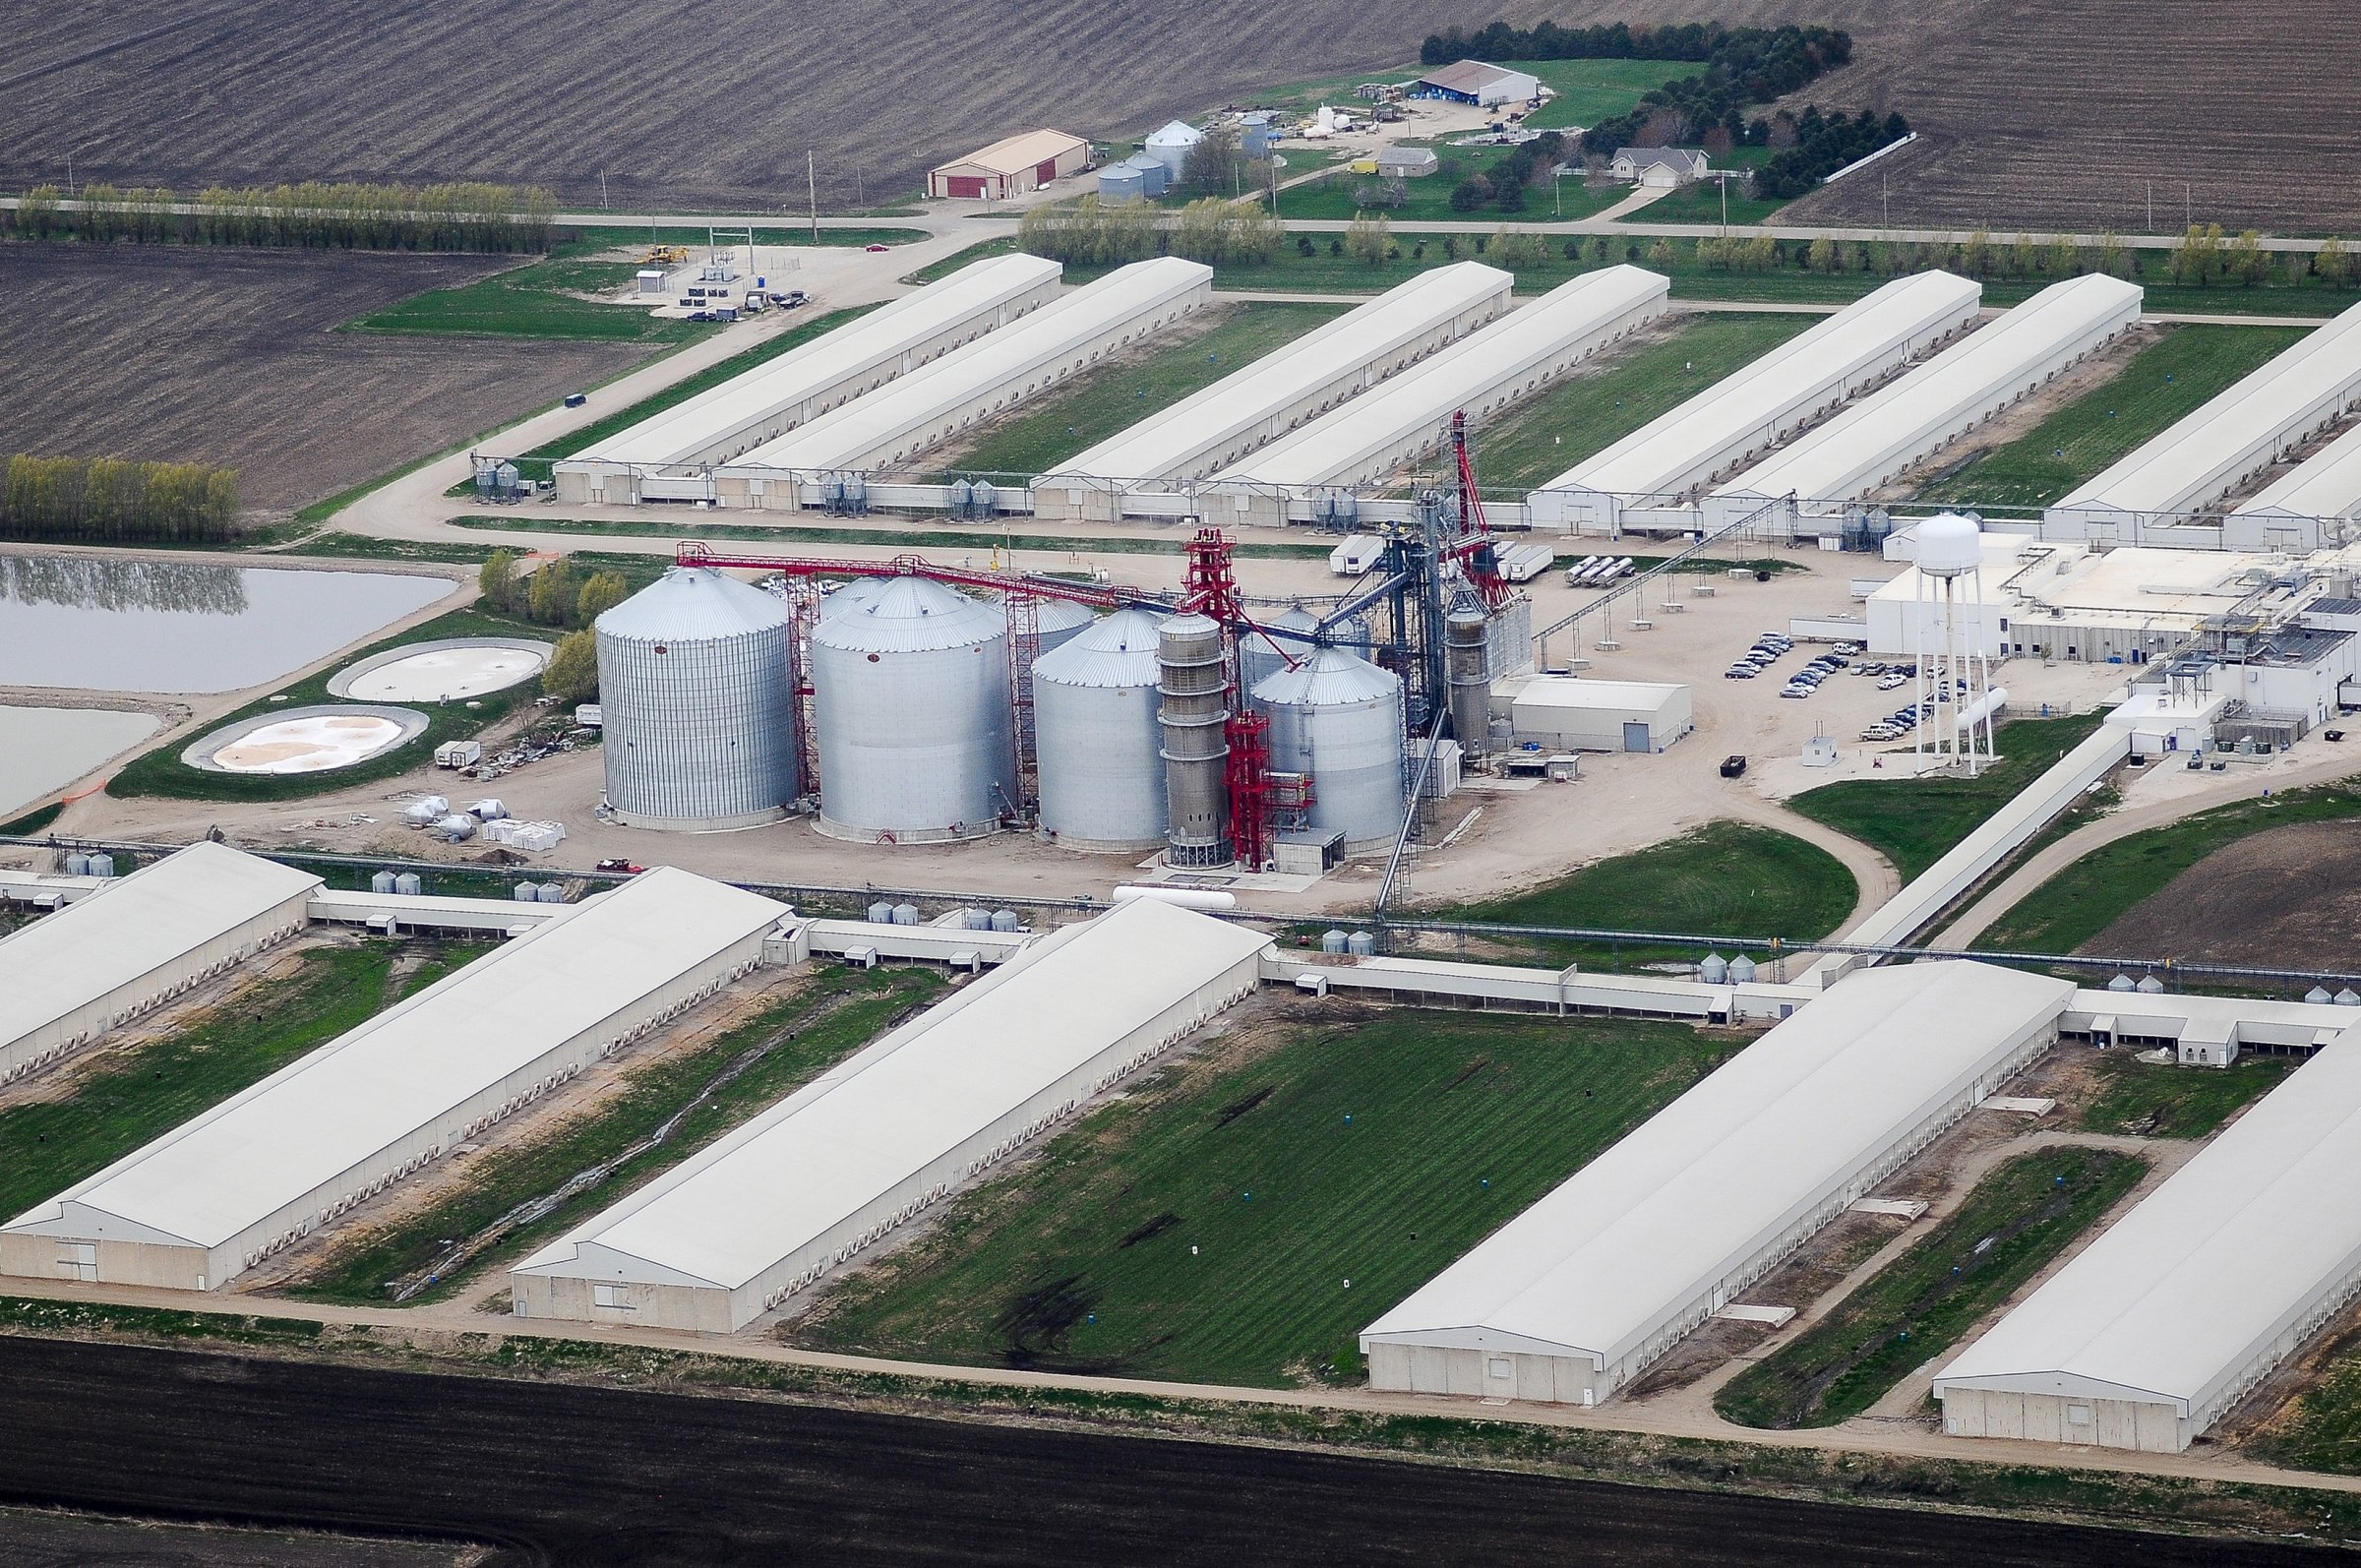 An egg-producing chicken farm run by Sunrise Farm is seen in Harris, Iowa on April 23, 2015. Iowa, the top U.S. egg-producing state, found a lethal strain of bird flu in millions of hens at an egg-laying facility on Monday, the worst case so far in a national outbreak that prompted Wisconsin to declare a state of emergency. The infected Iowa birds were being raised near the city of Harris by Sunrise Farms, an affiliate of Sonstegard Foods Company, the company said.